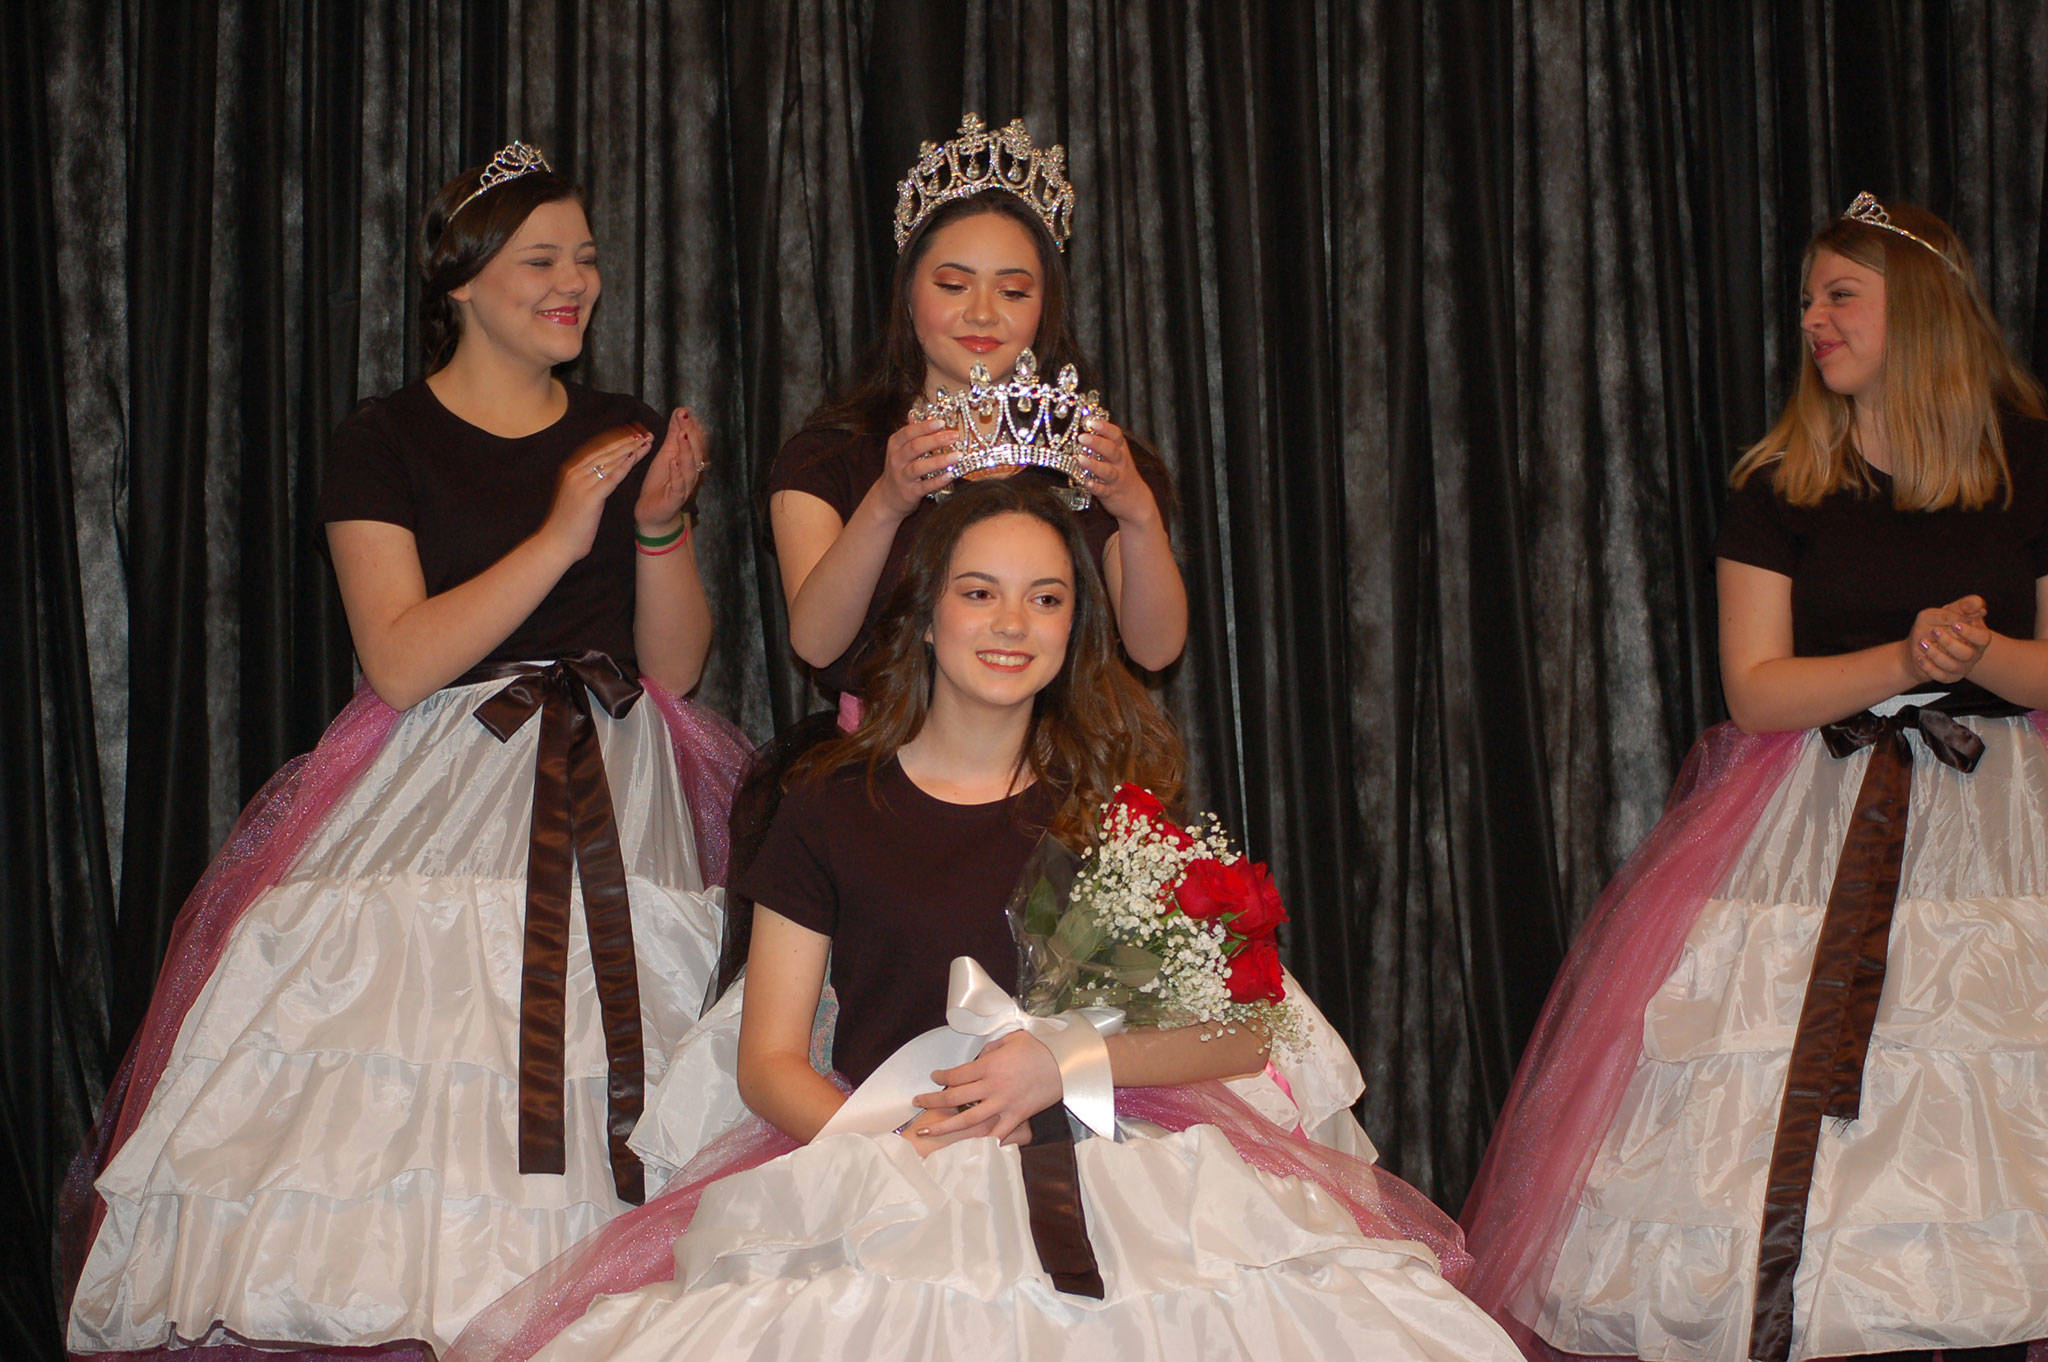 Princess Liliana Williams (foreground) was crowned at the Crazy Daze breakfast by Queen Erin Gordon, center, and joins Princesses Gabi Simonson, left, and Gracelyn Hurdlow on the 2018 Irrigation Festival Royalty Court. Sequim Gazette photo by Erin Hawkins